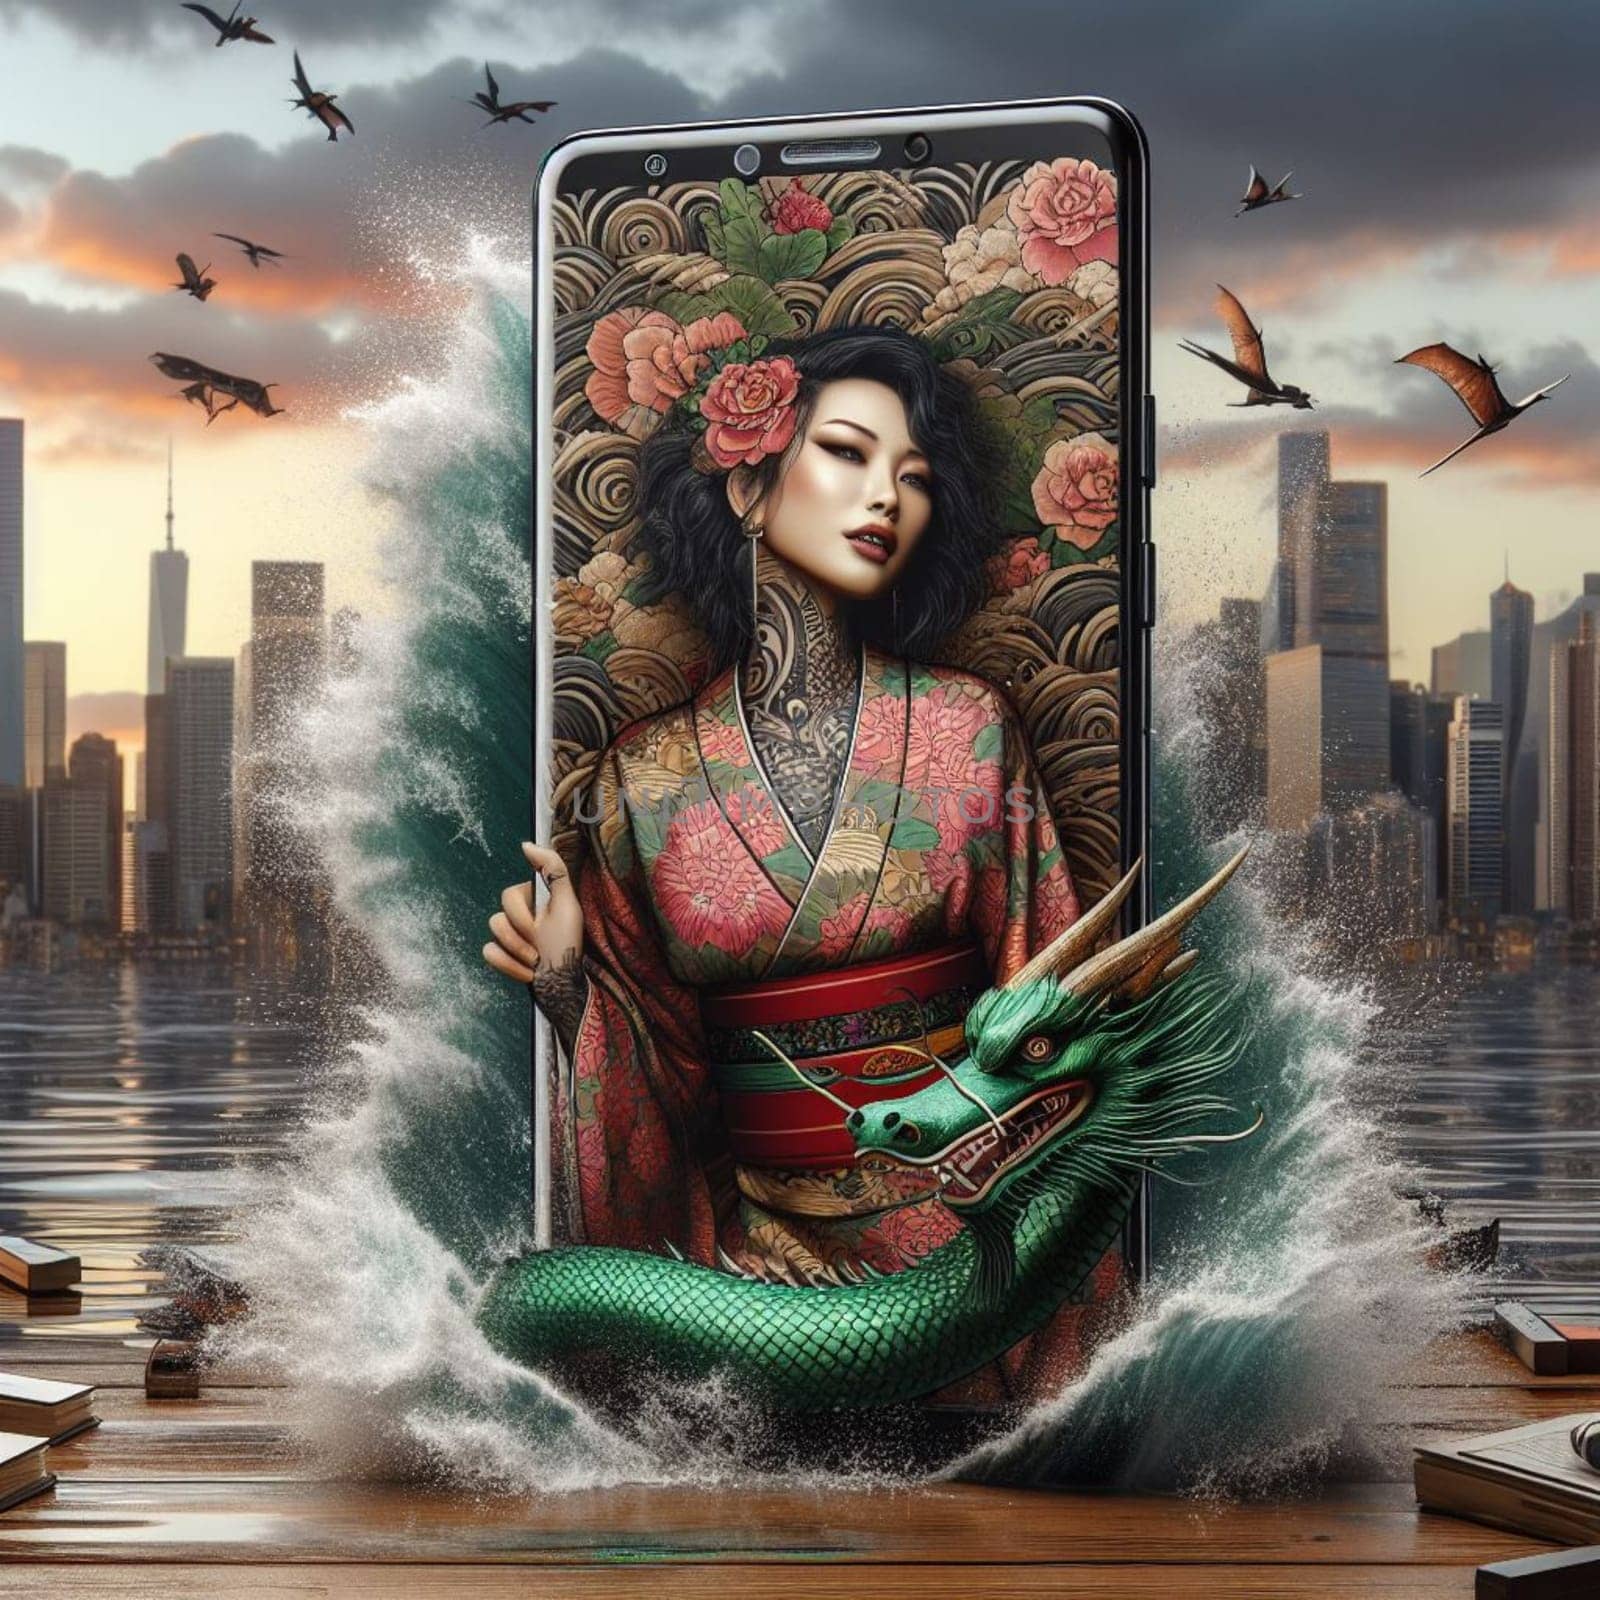 traditional woman wear dress city skyline sunset chinese dragon year out mobile phone screen on desk by verbano